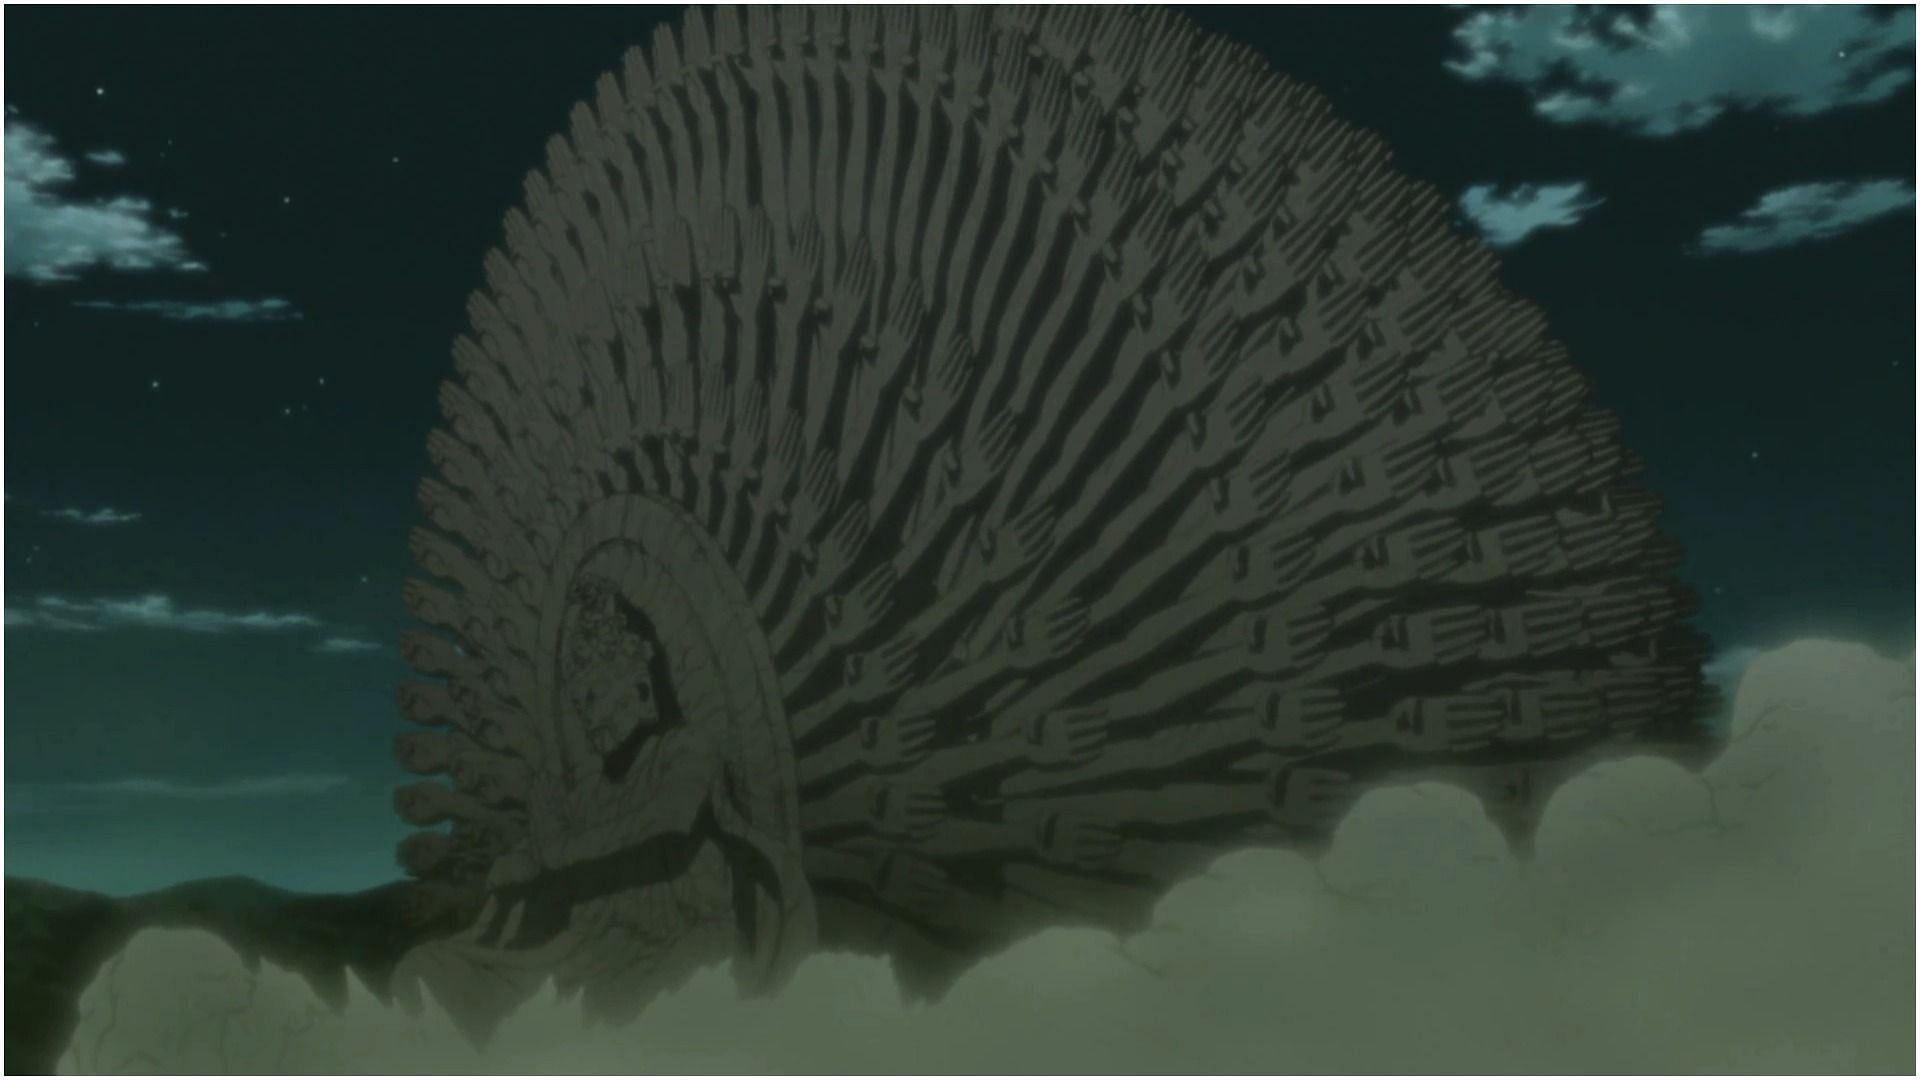 Sage Art Wood Release: True Several Thousand Hands as seen in Naruto (Image via Studio Pierrot)